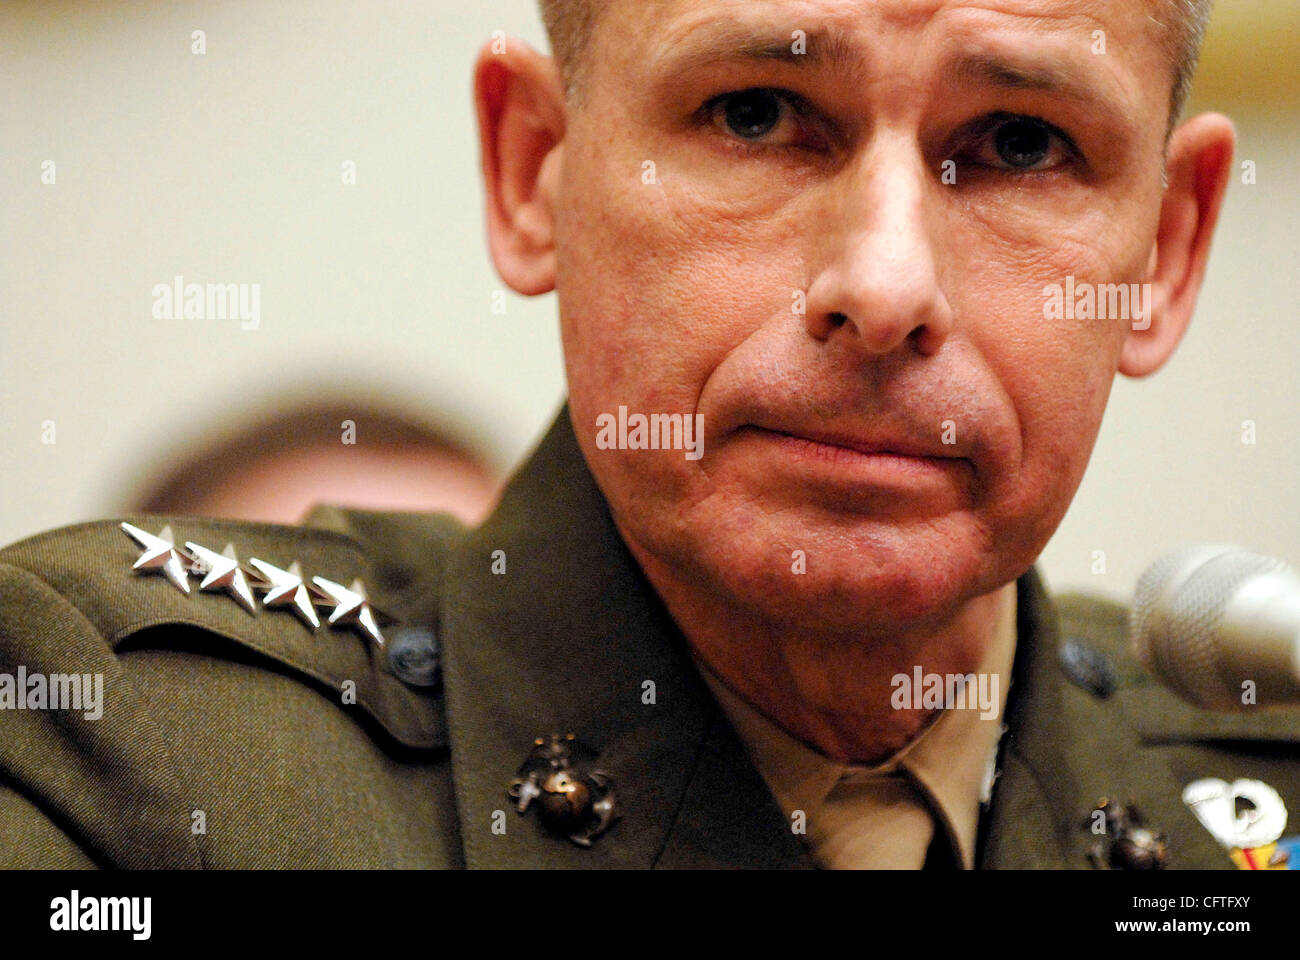 Jan 11, 2007; Washington, DC, USA; General PETER PACE answers questions from the House Armed Services Committee about President Bush's plan to send over 21,000 more troops to Iraq. Mandatory Credit: Photo by Mark Murrmann/ZUMA Press. Stock Photo